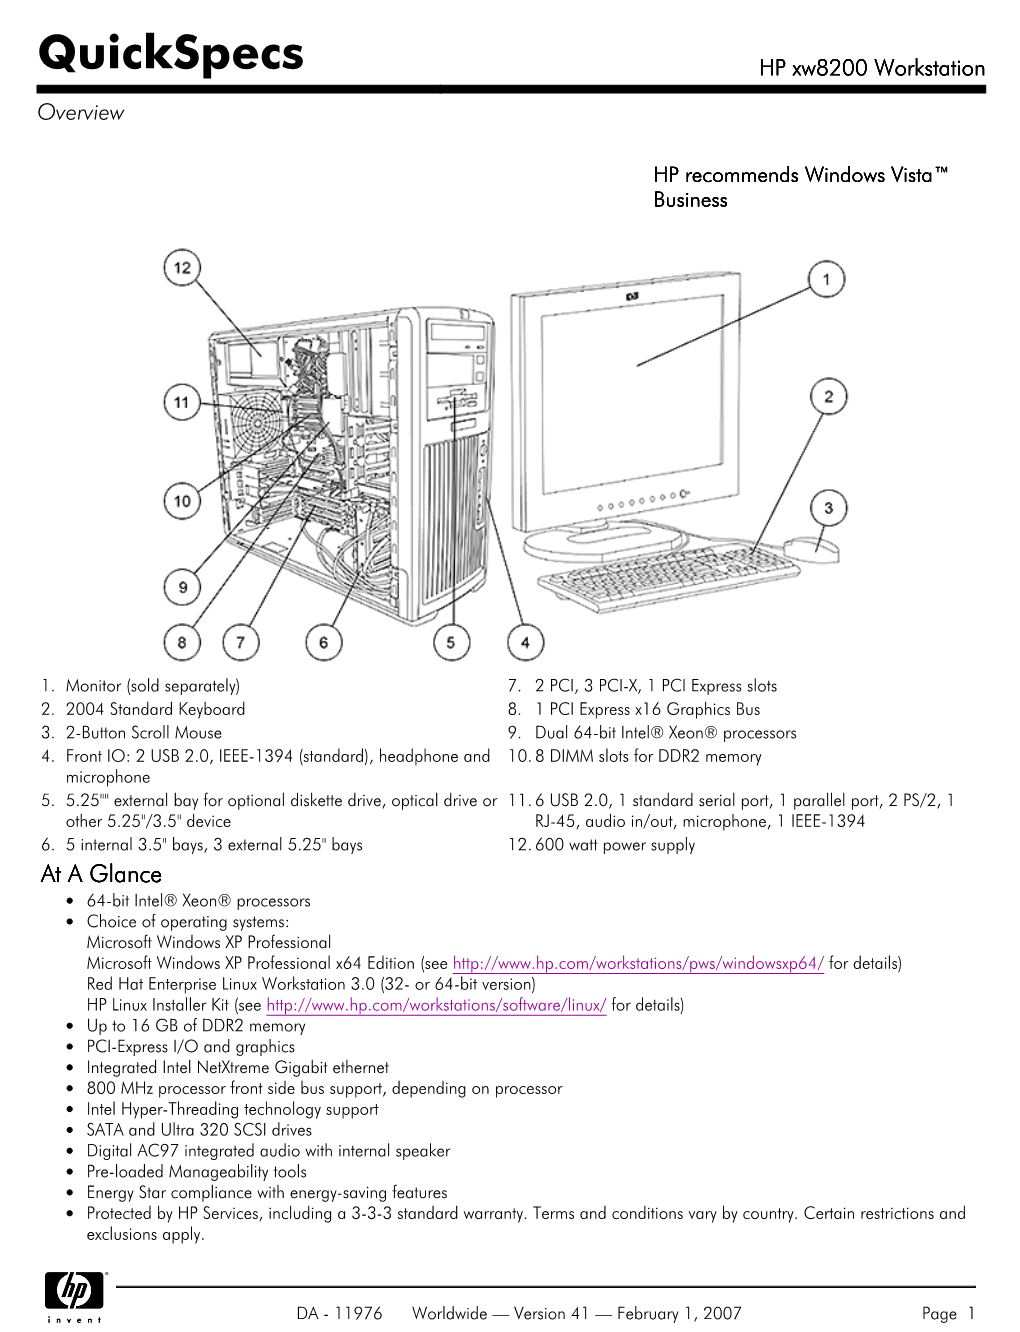 HP Xw8200 Workstation Overview